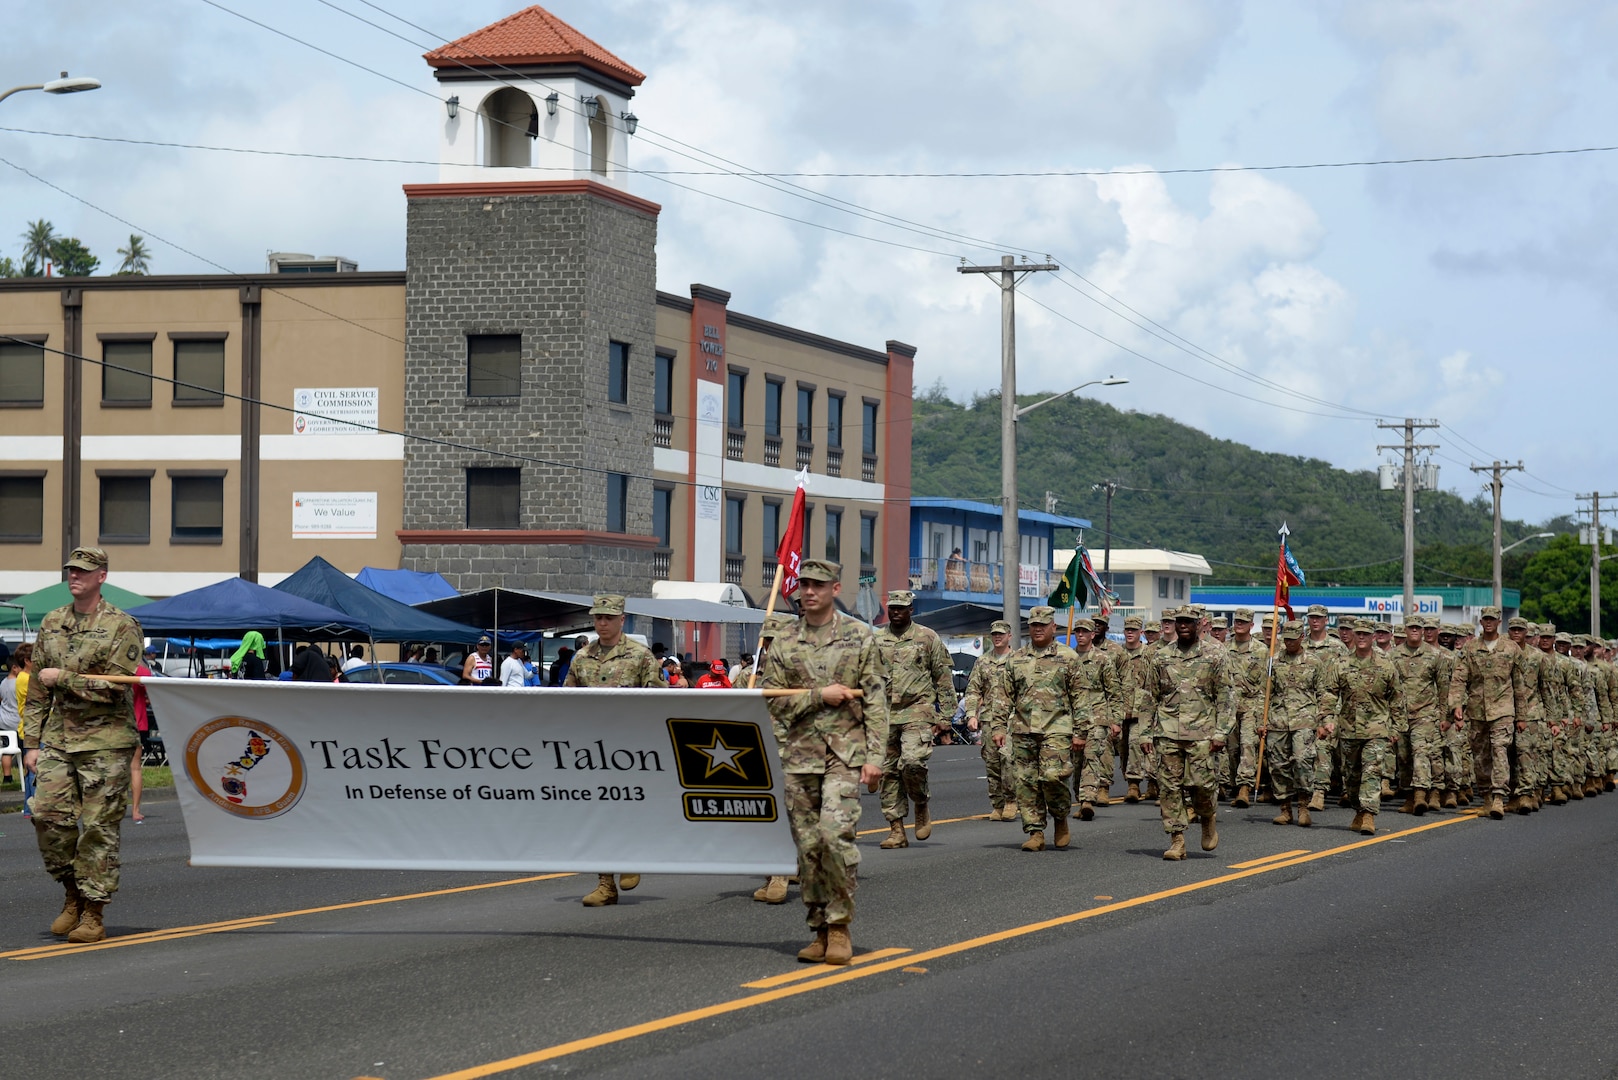 U.S. Soldiers assigned to Task Force Talon, 94th Army and Missile Command, and local citizens participate in the 73rd Guam Liberation Day parade July 21, 2017, in Hagåtña, Guam. Liberation Day is celebrated every year on July 21 to mark the day Guam was liberated by U.S armed forces from Japanese occupation in 1944. (U.S. Air Force photo by Airman 1st Class Gerald R. Willis)